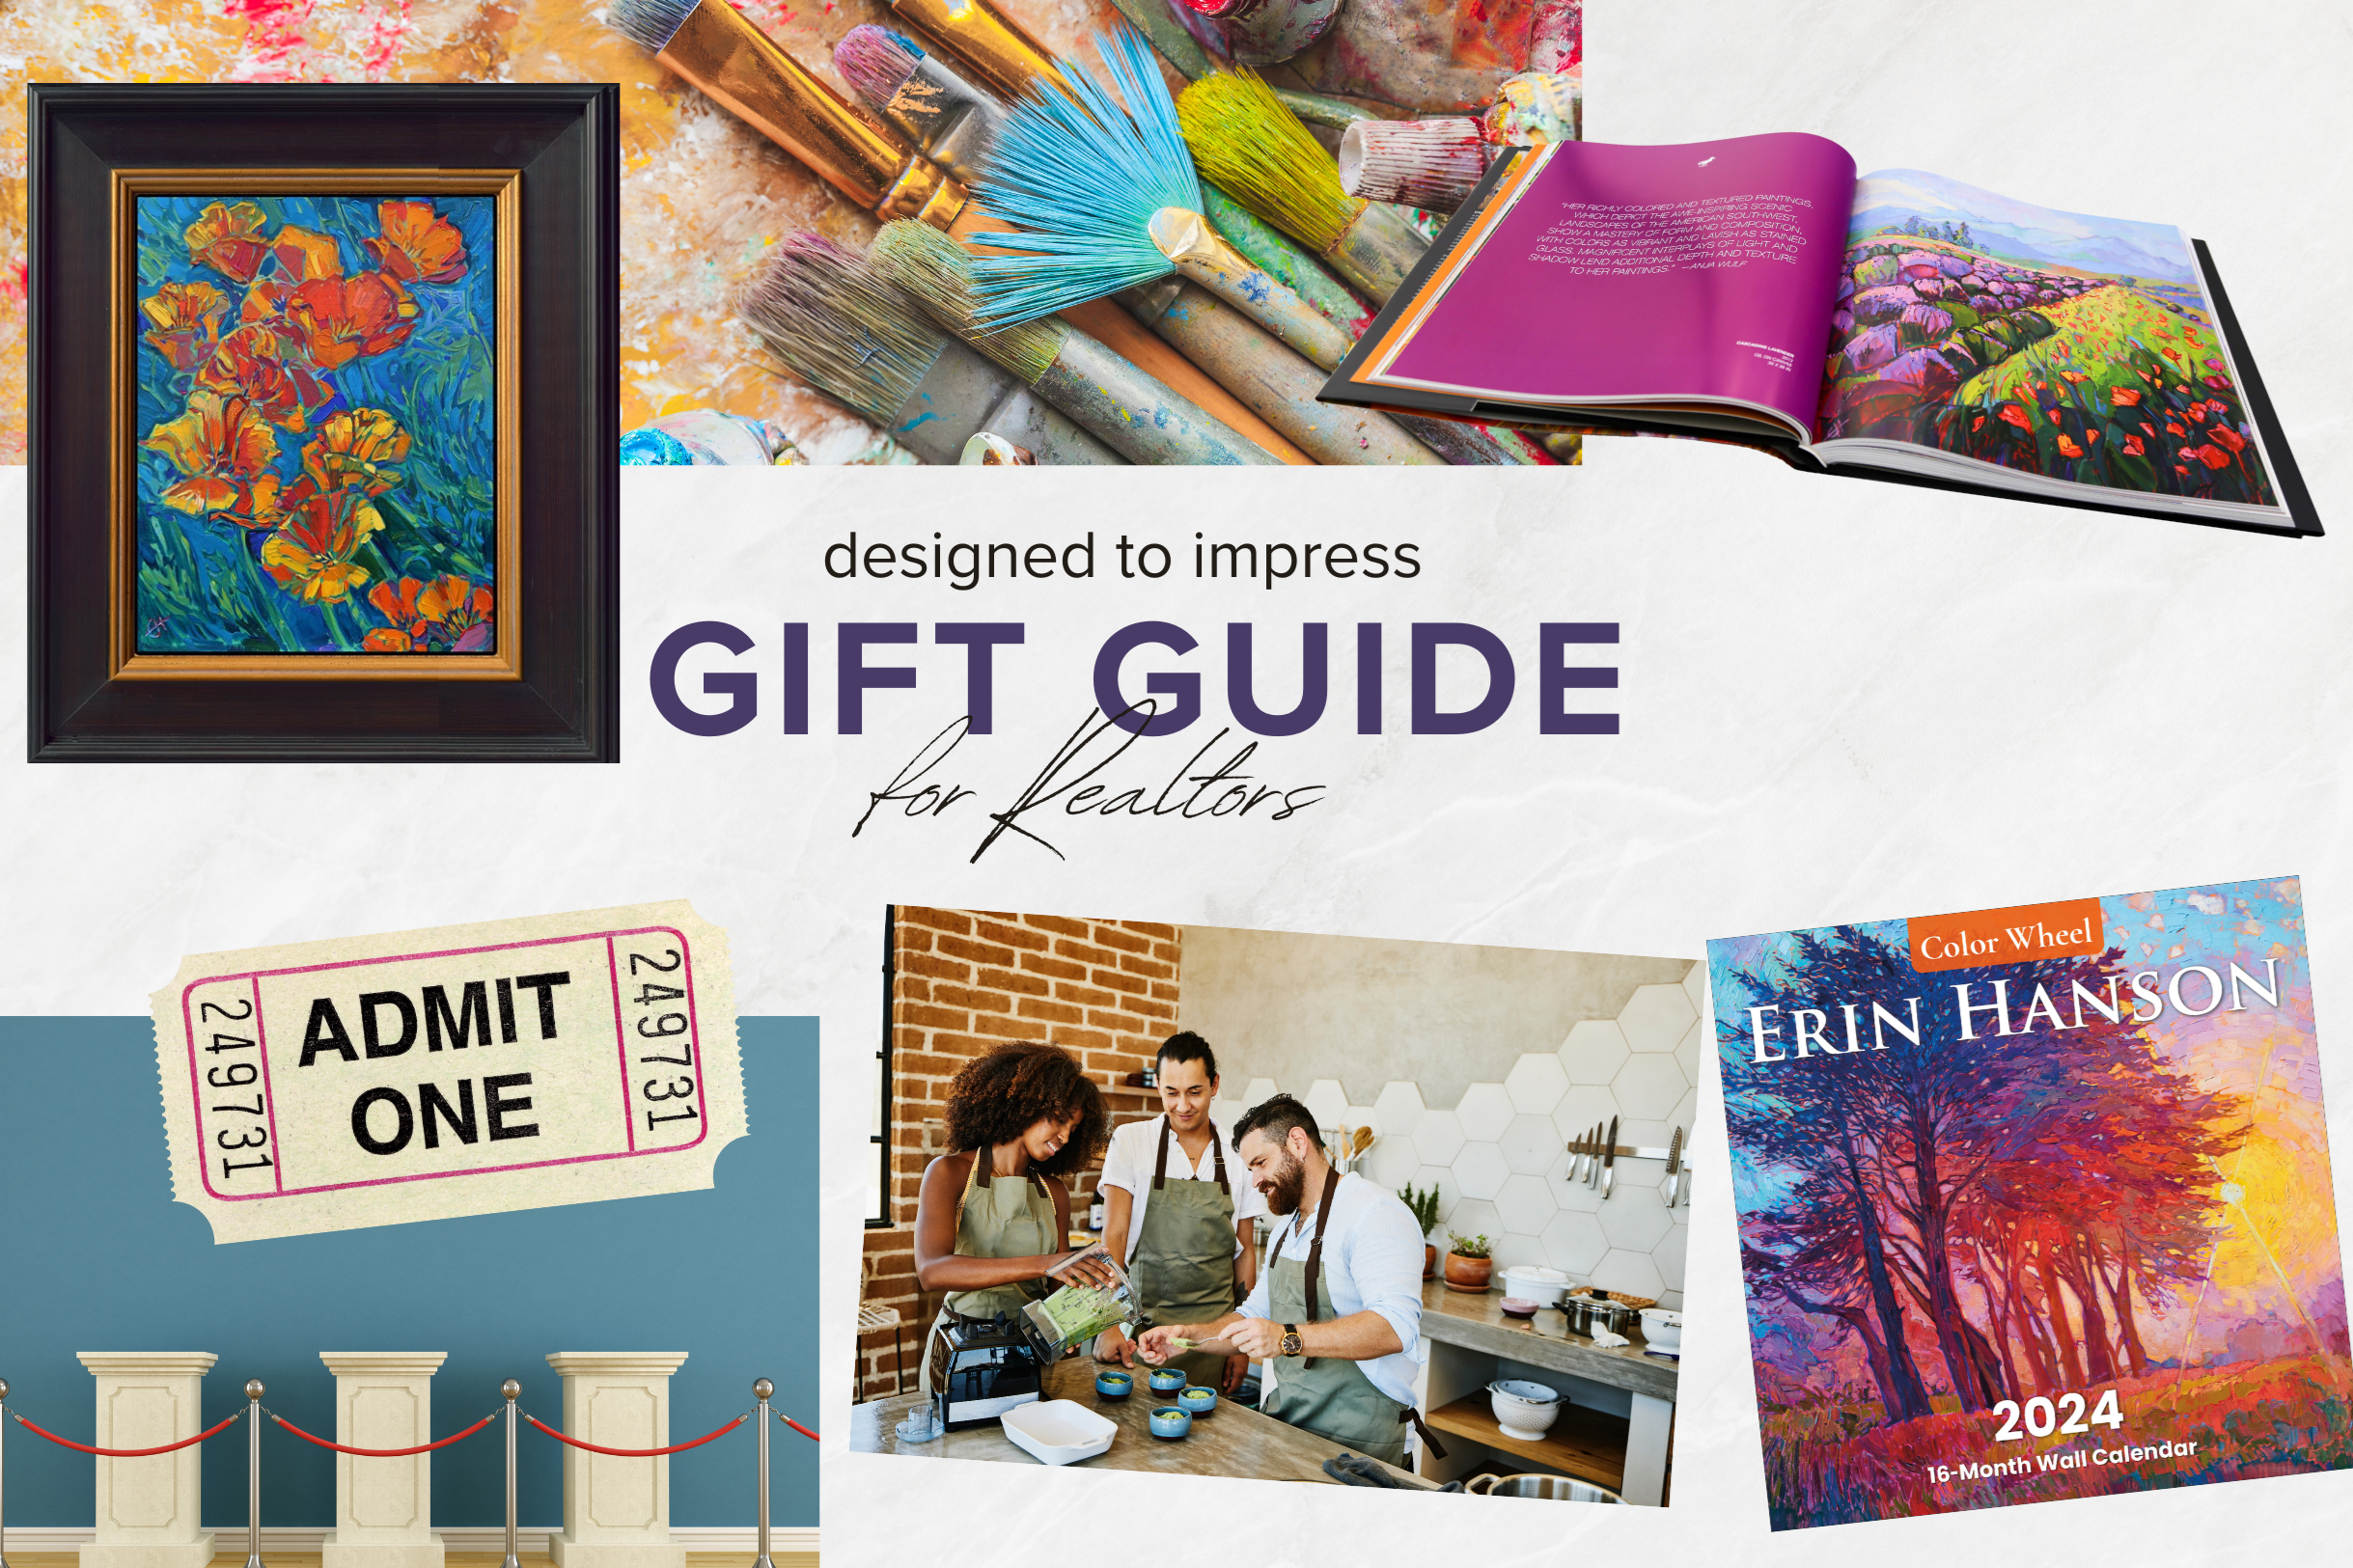 15 Art-Related Closing Gift Ideas for Realtors